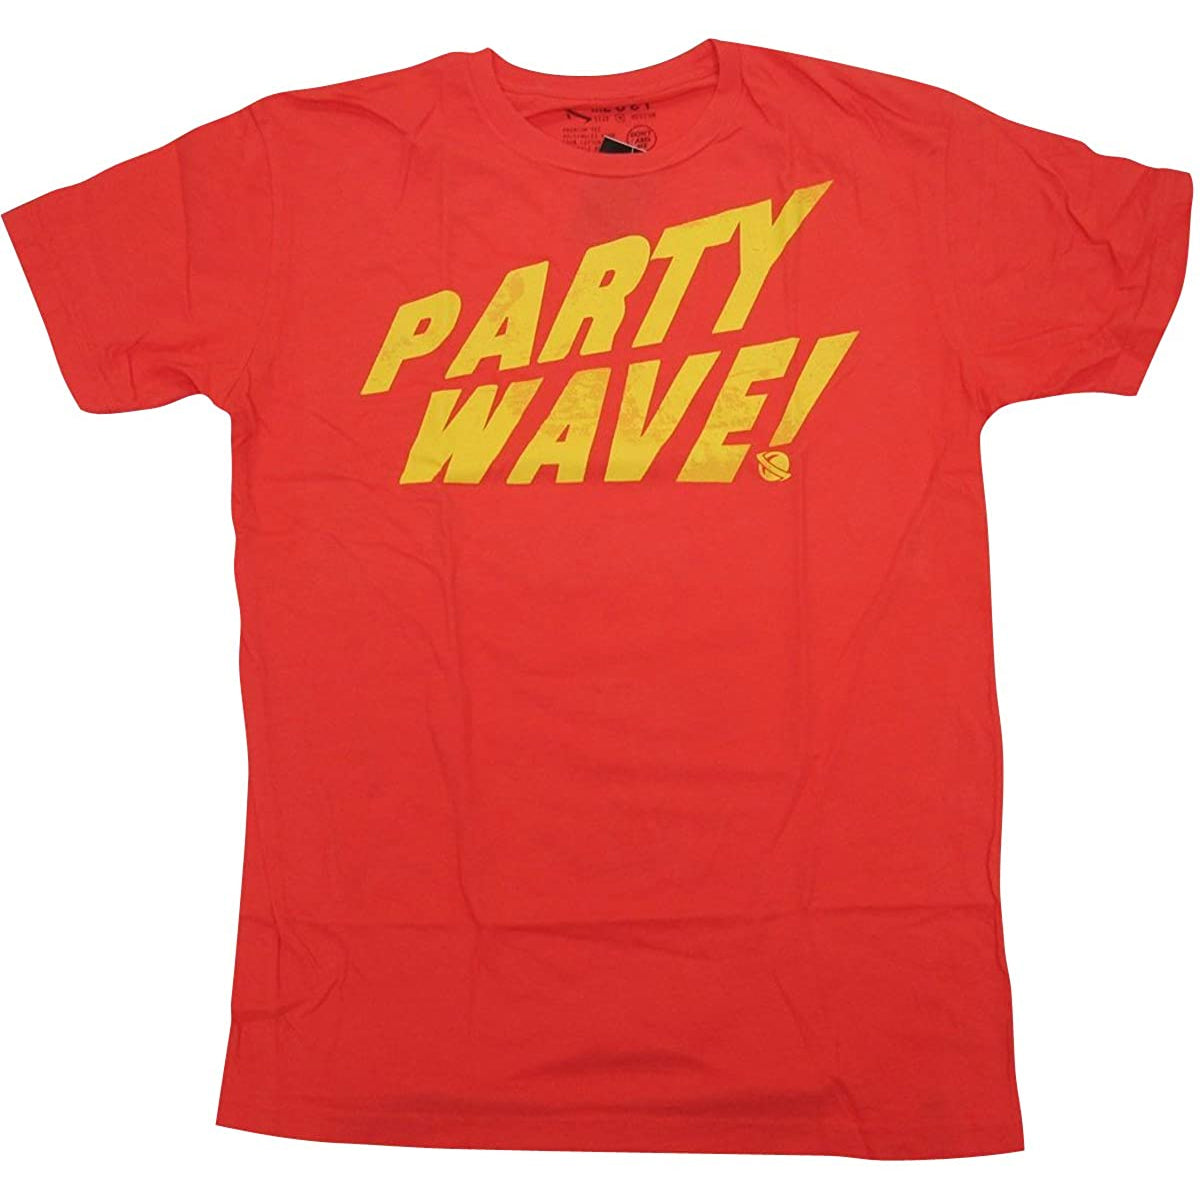 Lost Party Wave Men's Short-Sleeve Shirts Brand New-LT122078